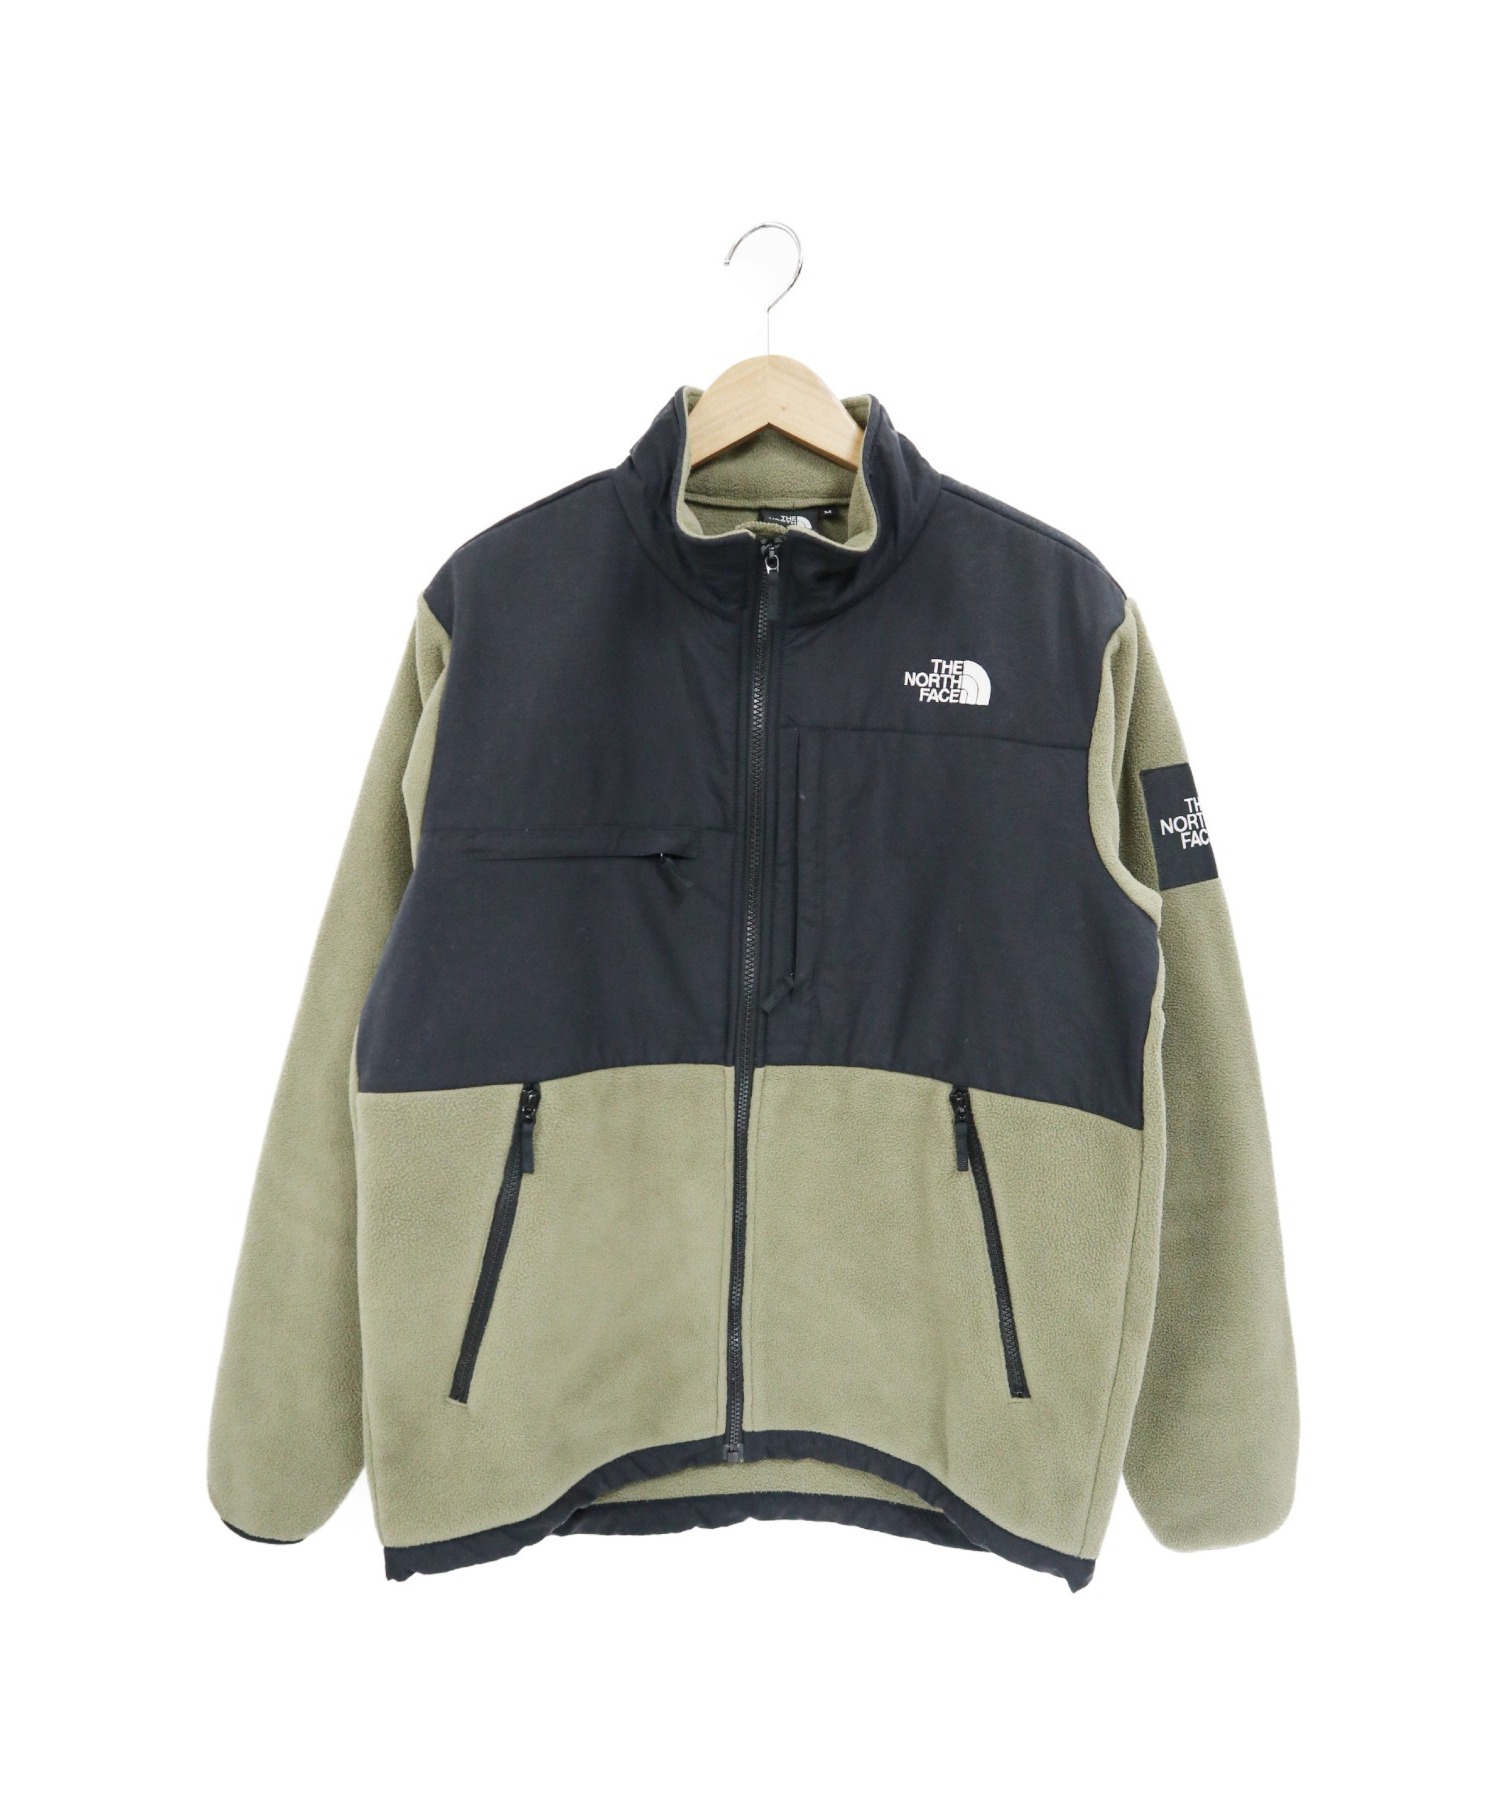 THE NORTH FACE　デナリジャケット  NA61631